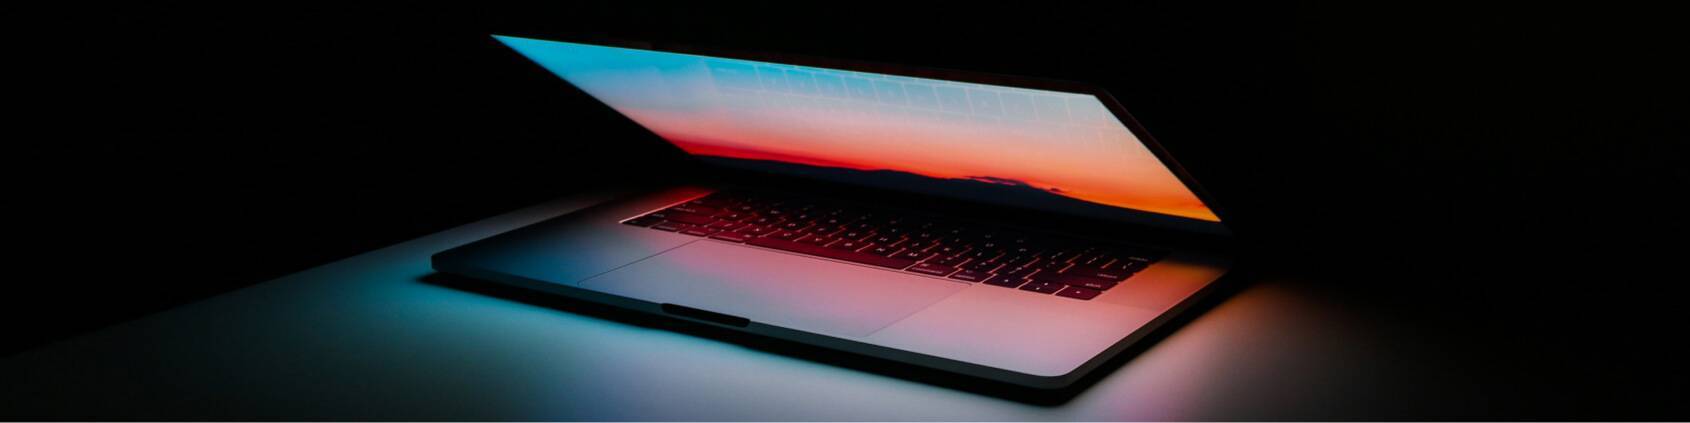 Half closed laptop sits on a table in a dark room. The computer glows with a red screen.